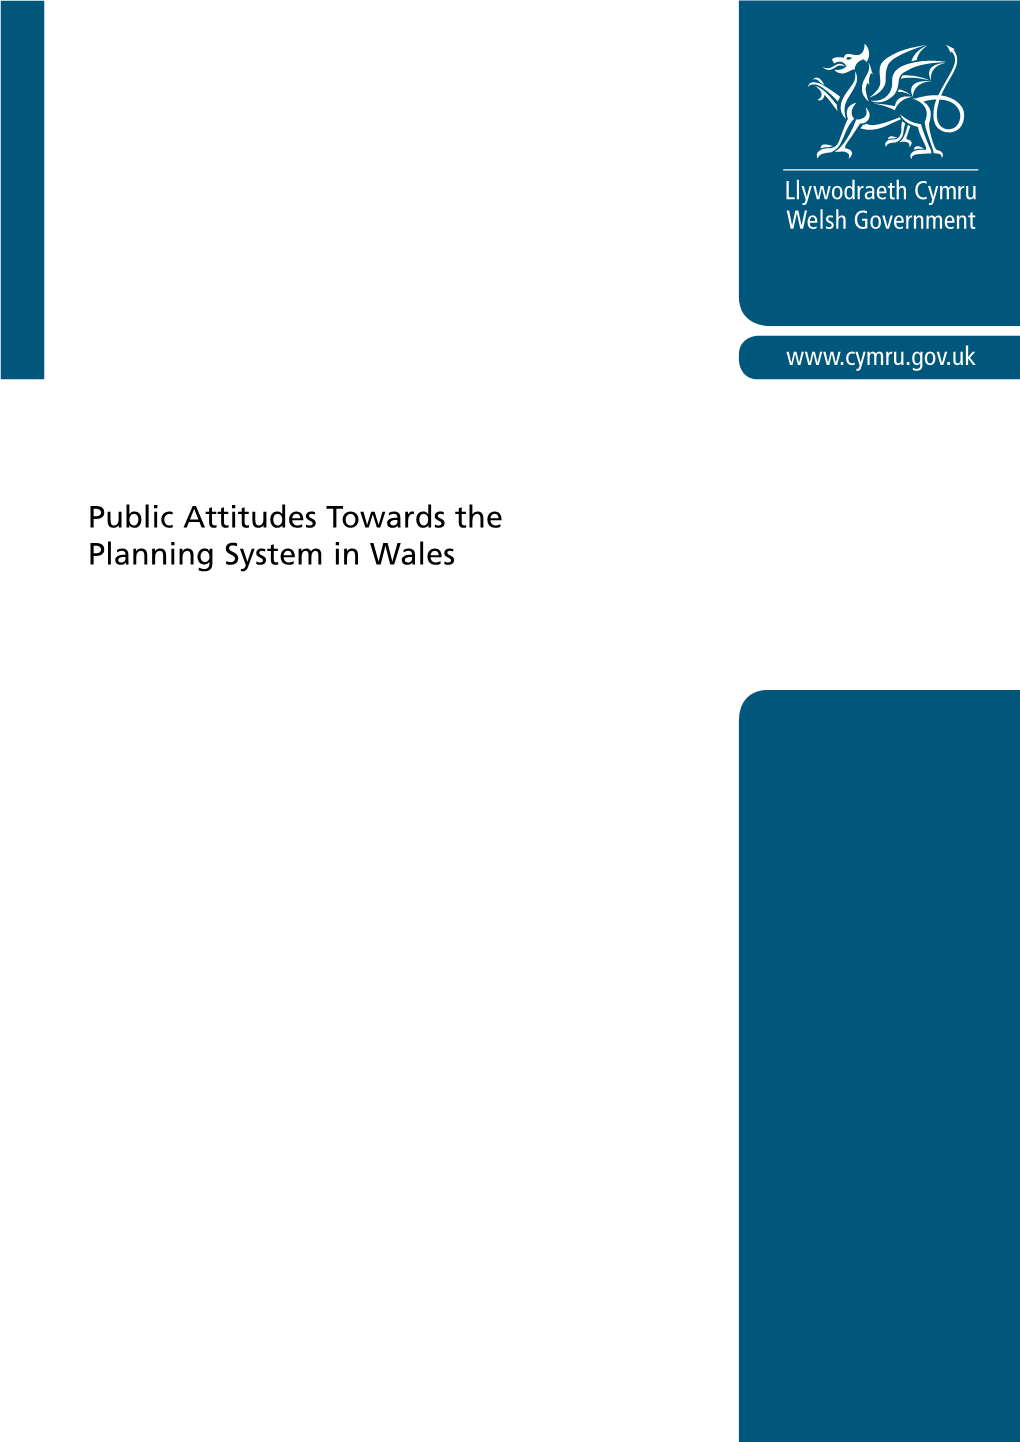 Public Attitudes Towards the Planning System in Wales